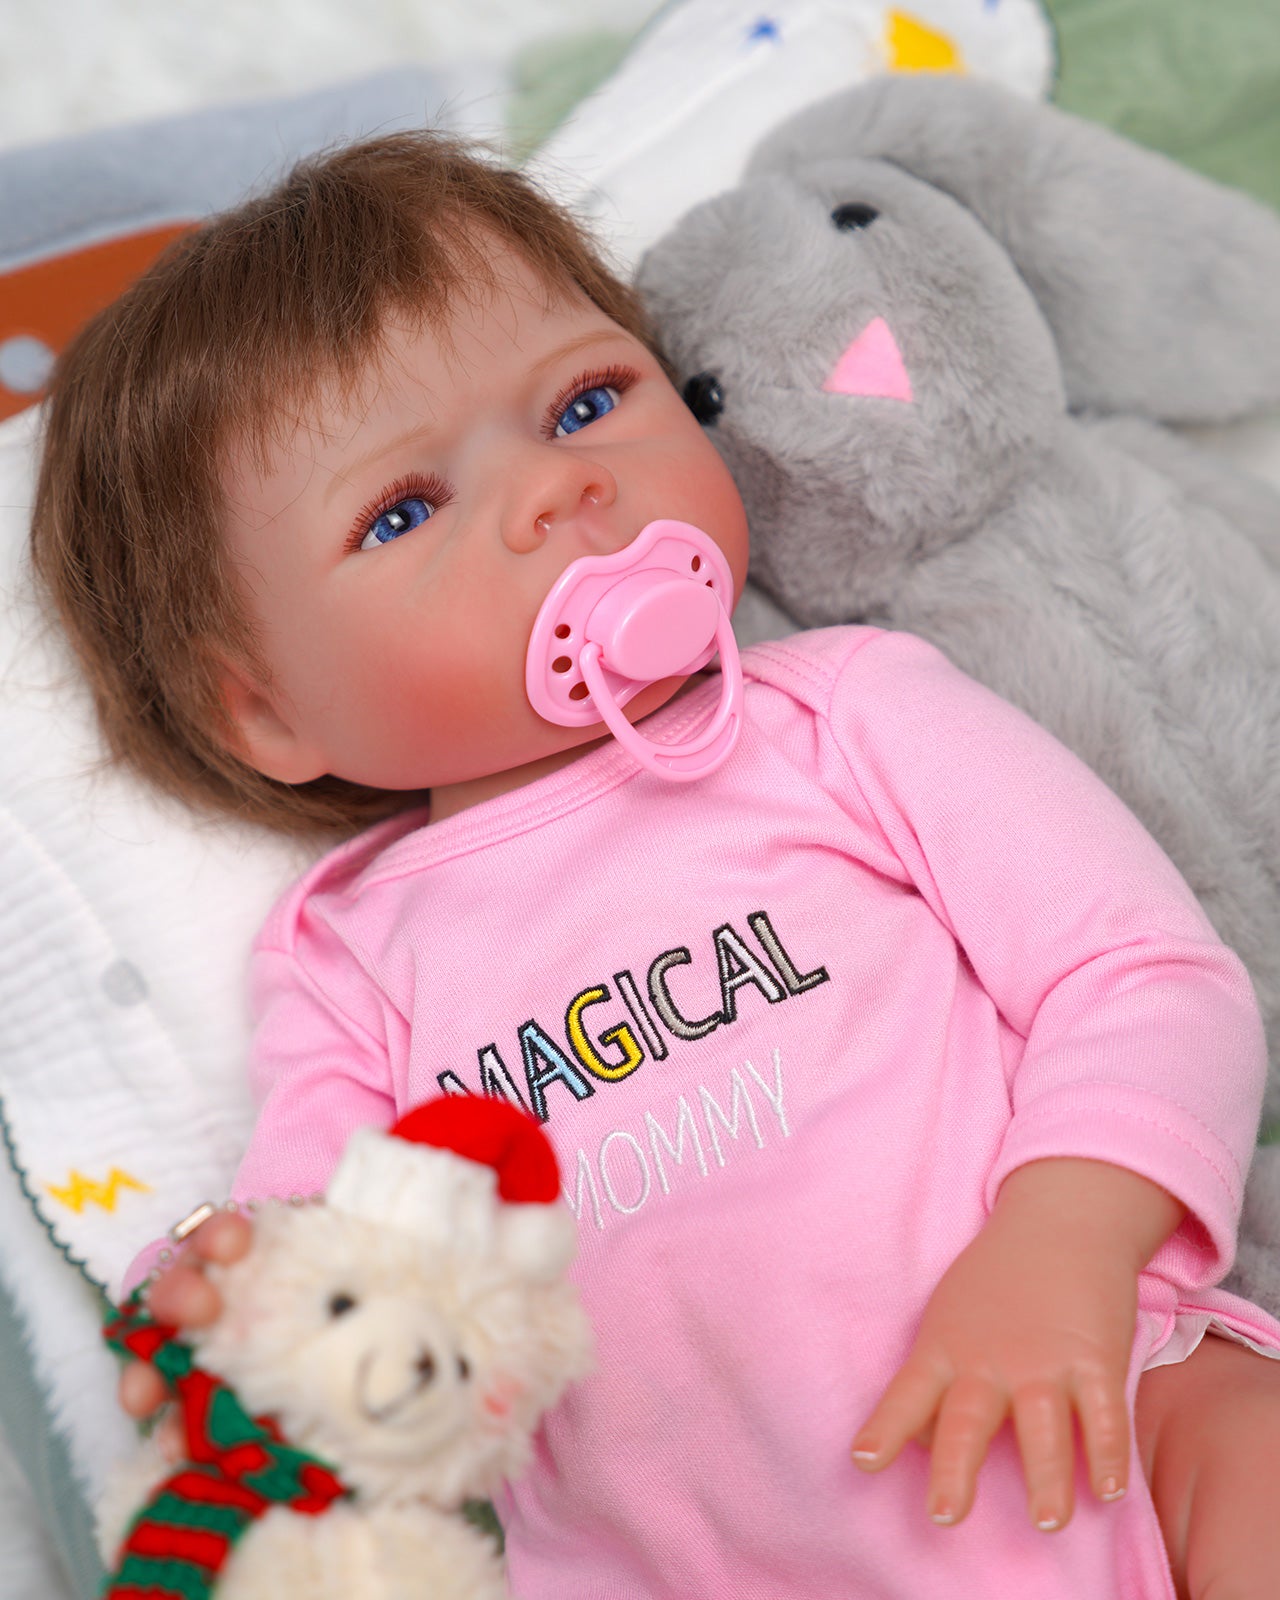 Sophia - 18" Reborn Baby Dolls Tiny Puckered Mouth Newborn Girl with Porcelain-like Complexion